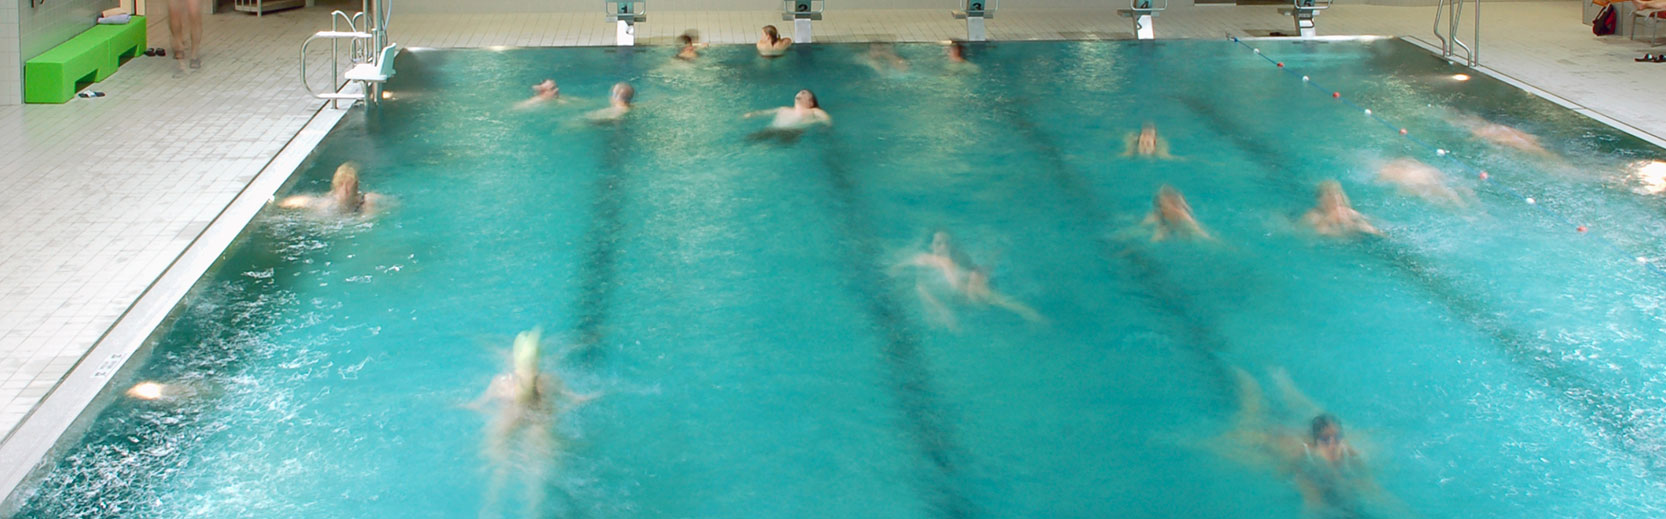 image of a large public pool with people swimming